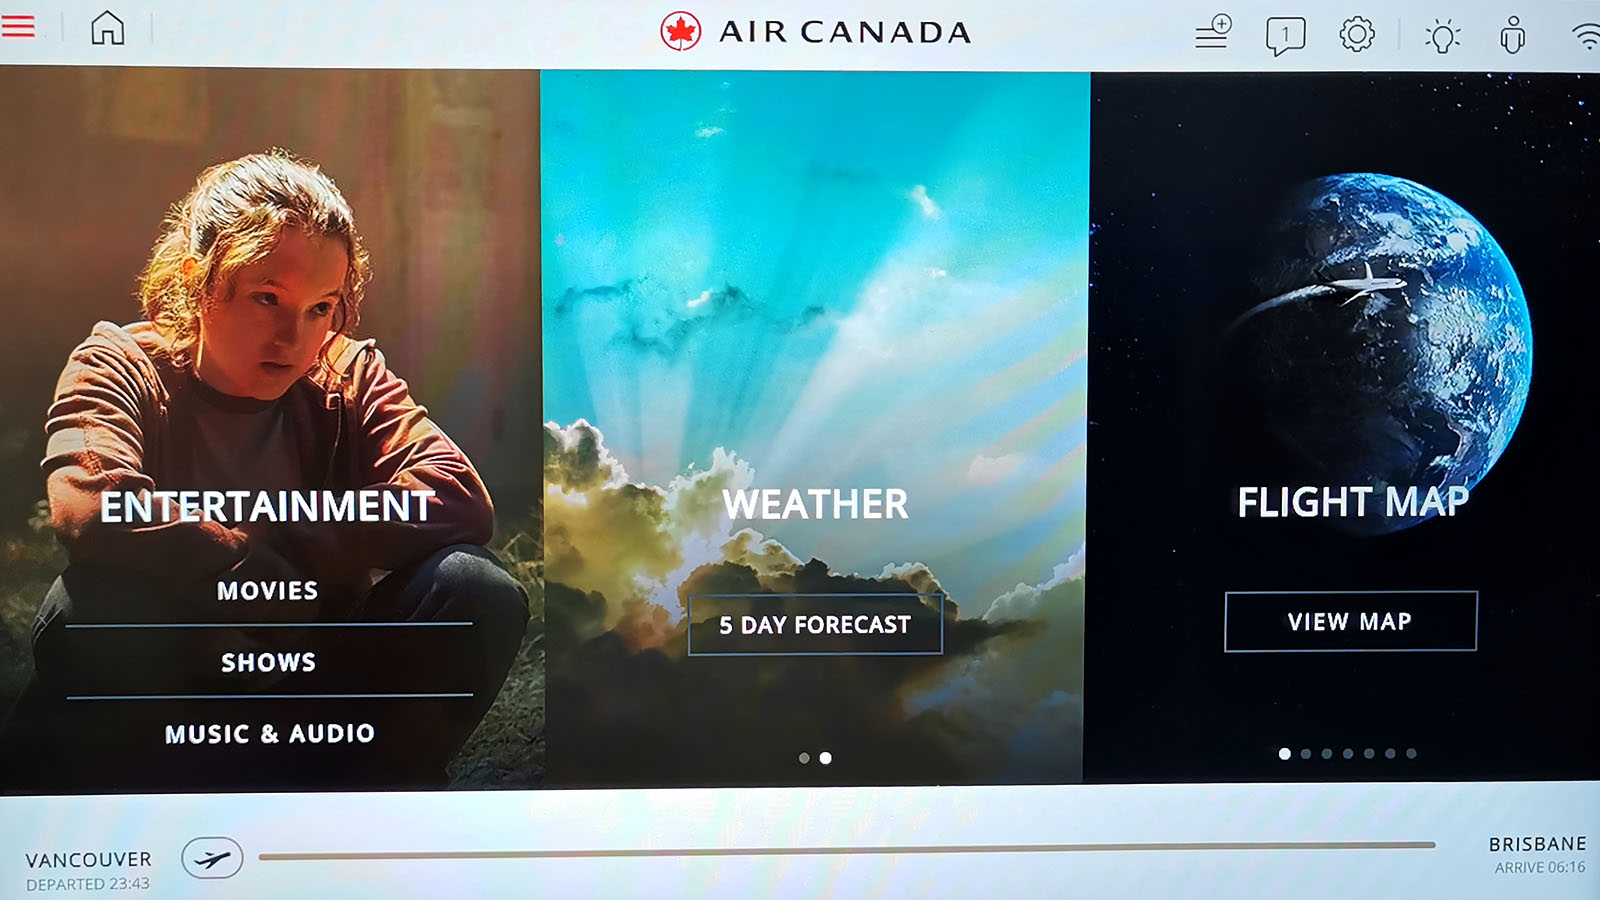 Content selection in Air Canada Boeing 787 Signature Class